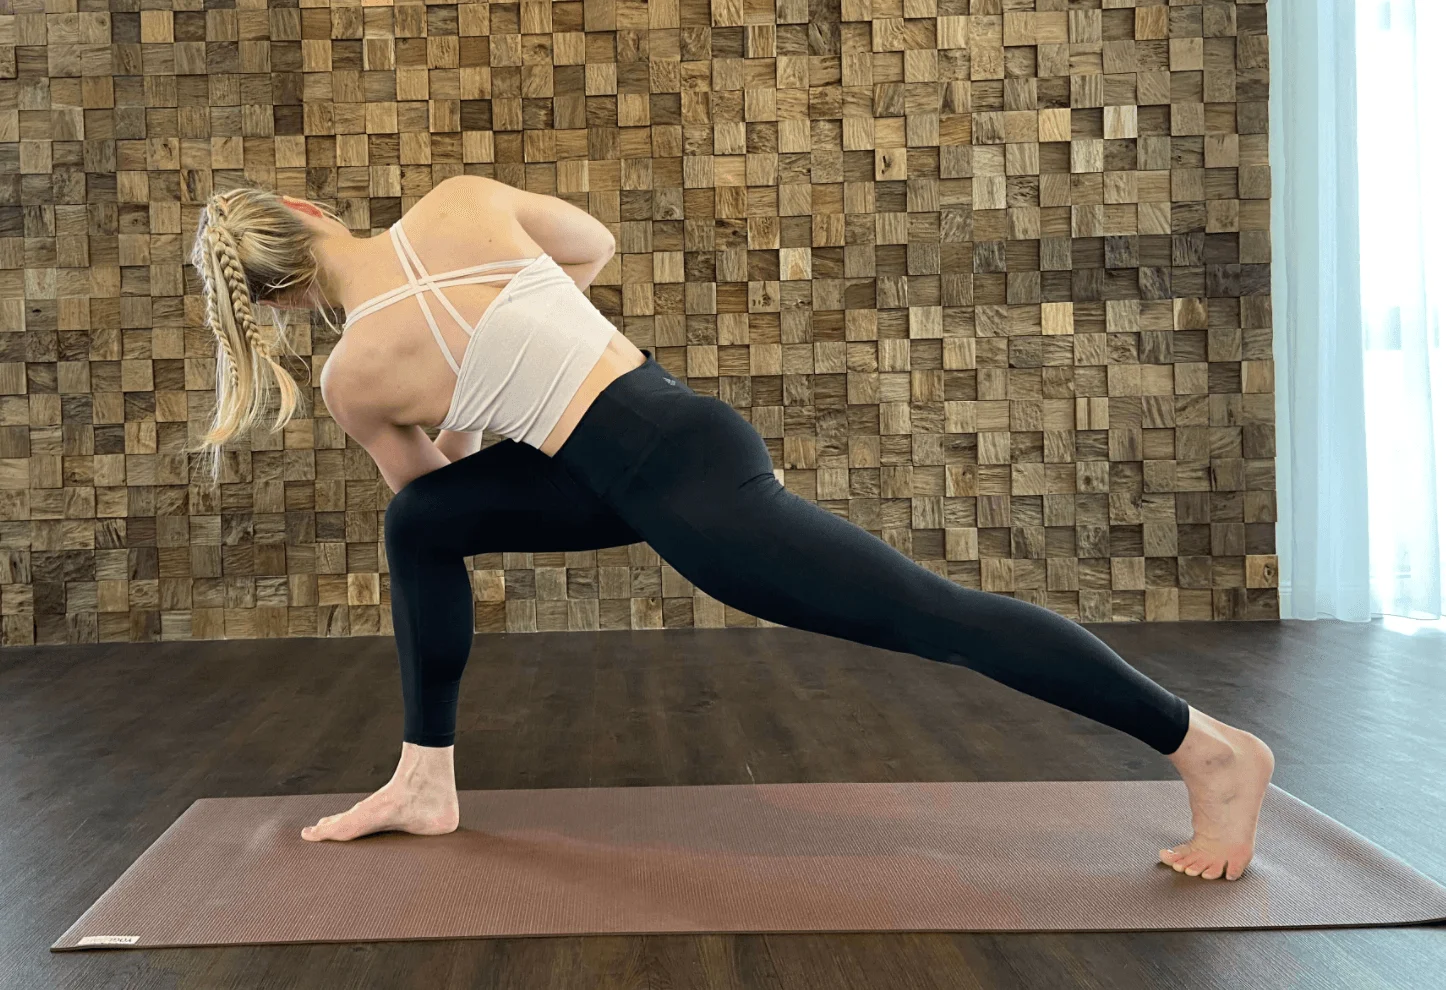 Yoga for belly fat: Can you get a flat belly by just doing some asanas? |  HealthShots